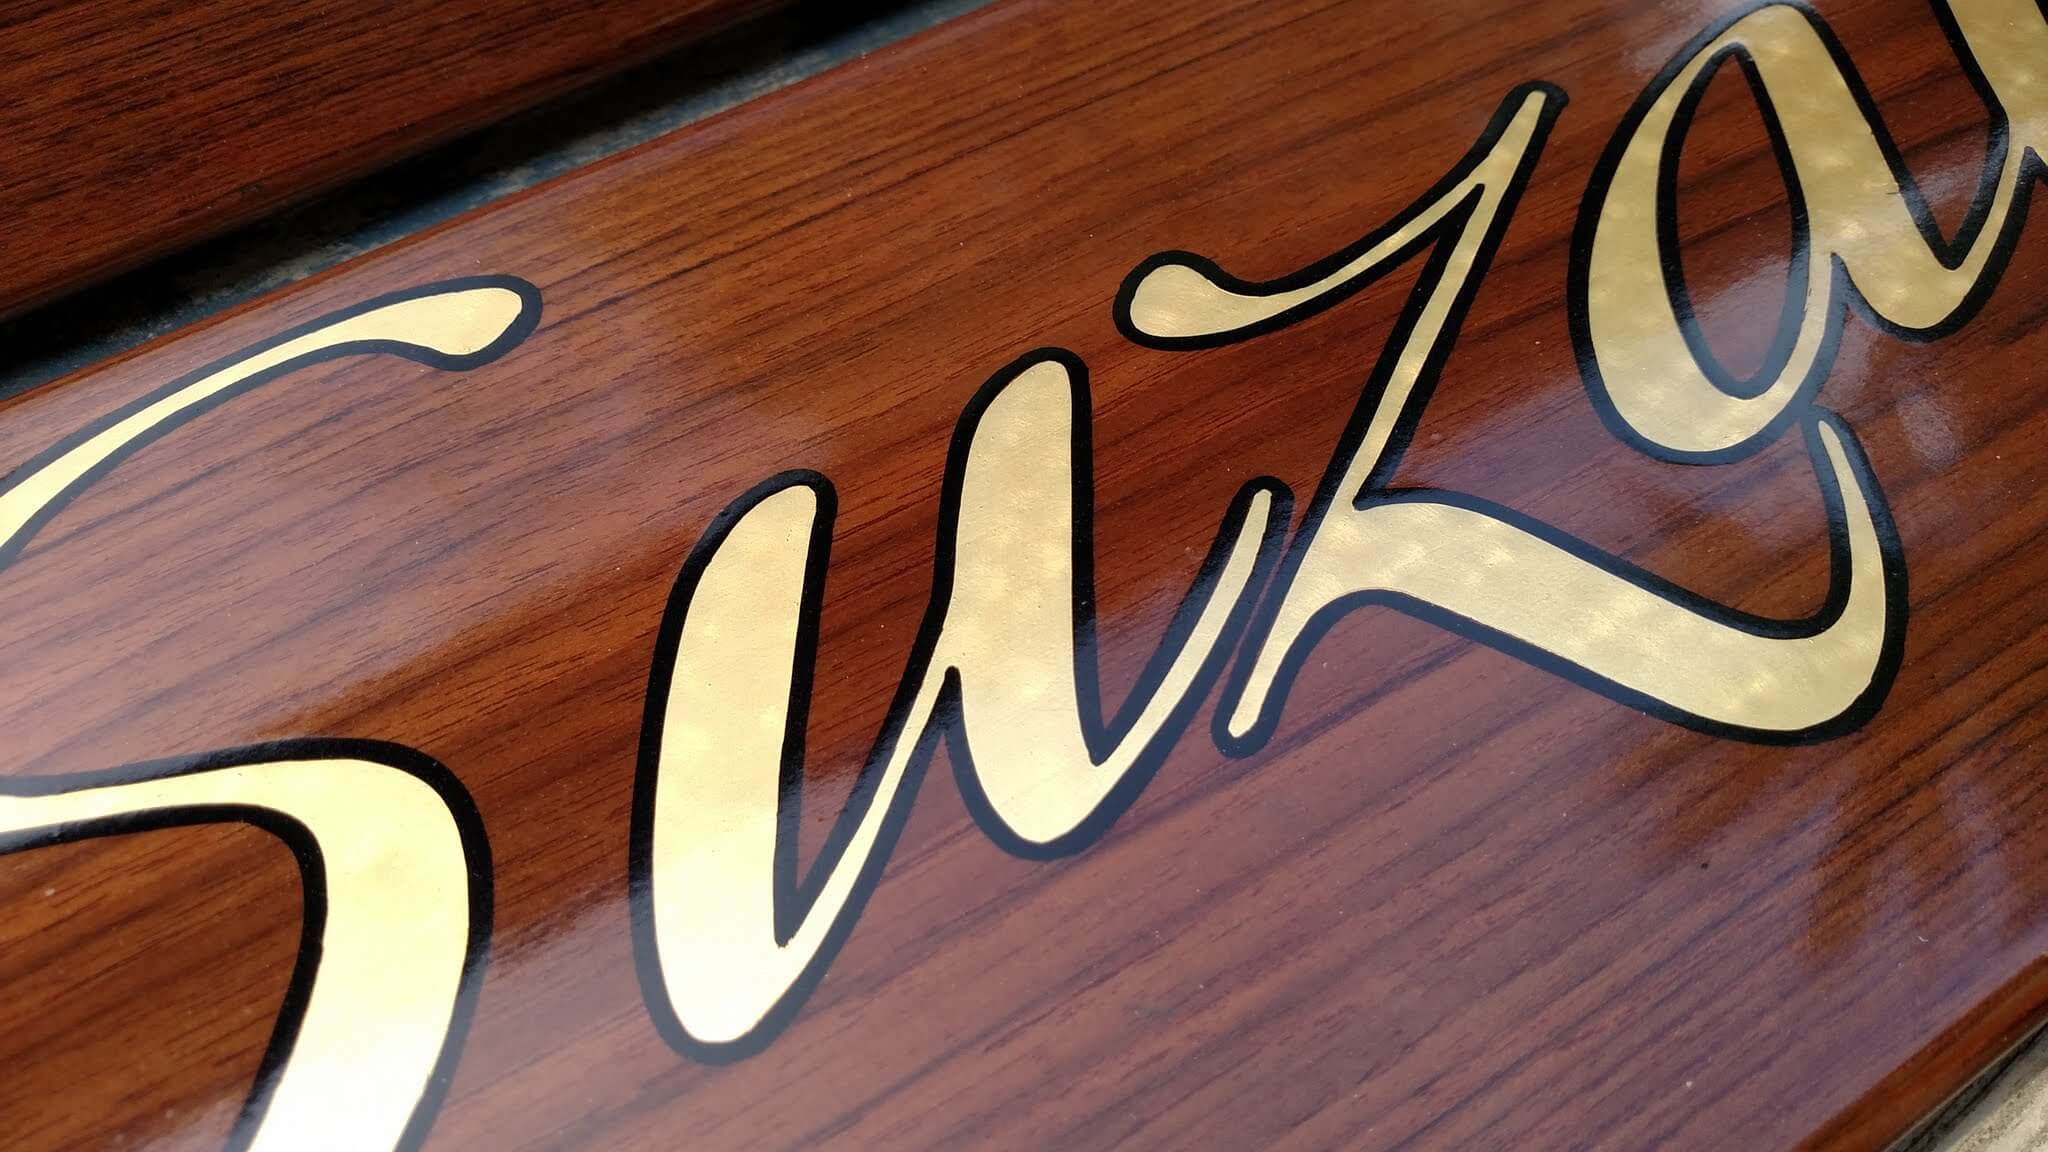 A flat gilded letter with outline